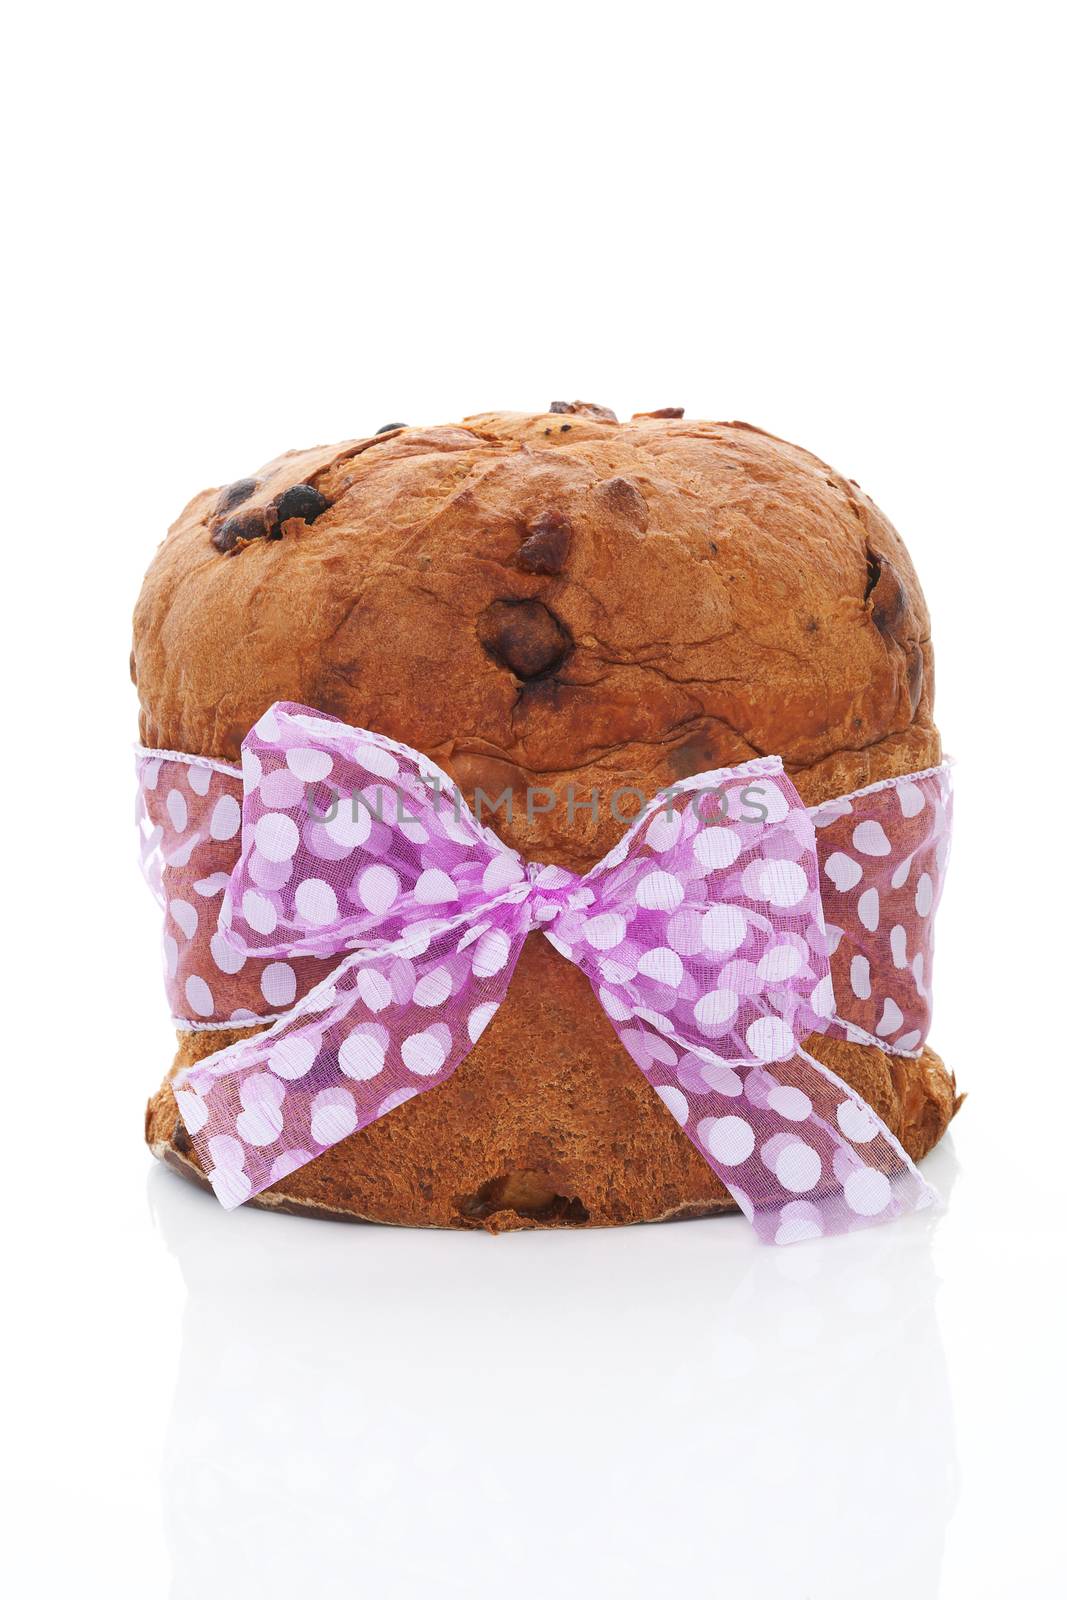 Delicious luxurious panettone fruit cake with purple bow isolated on white background. Culinary sweet dessert.